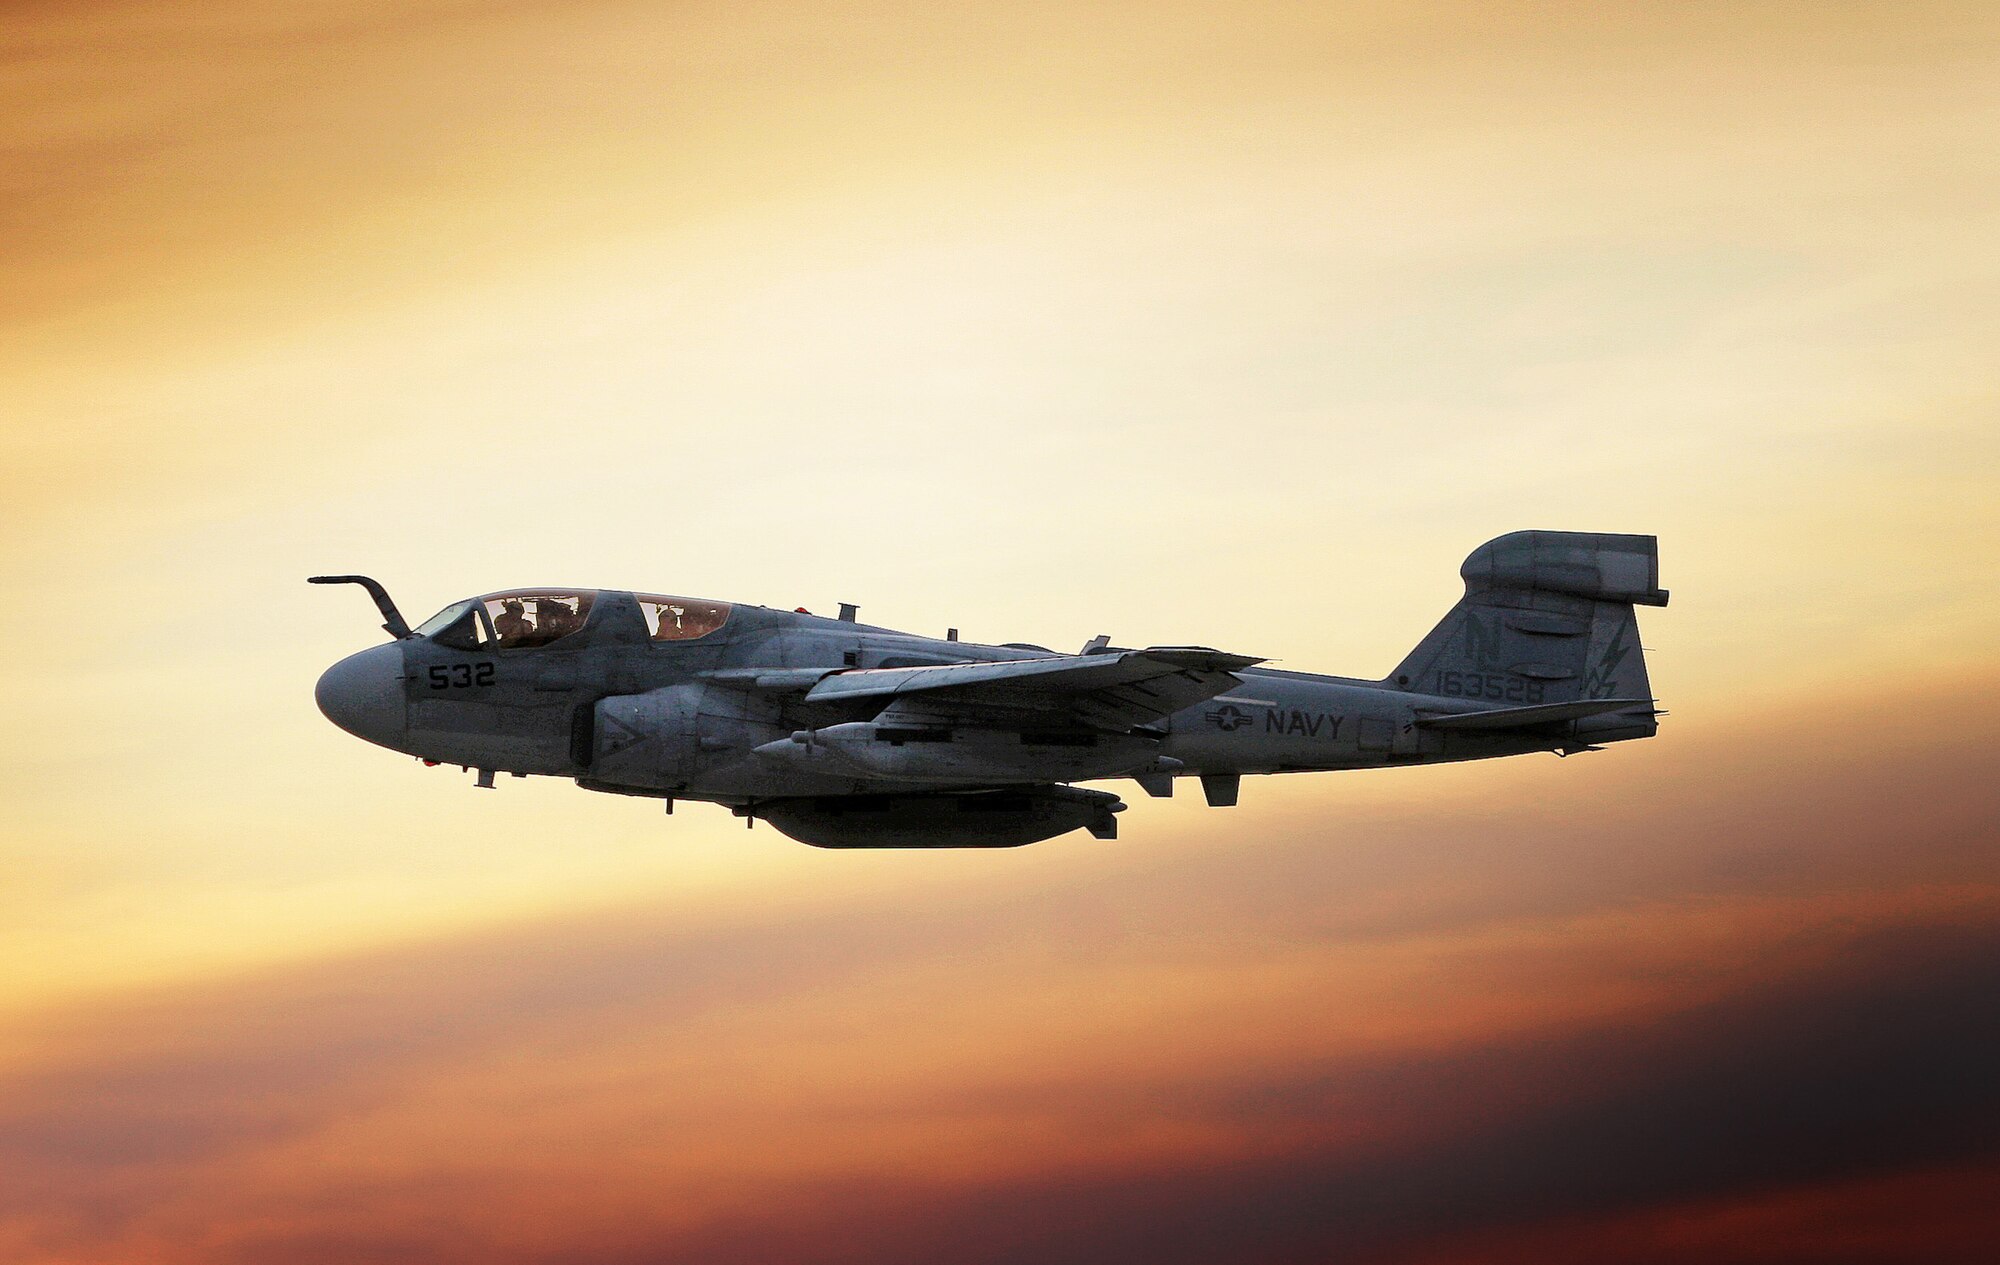 A Navy EA-6B Prowler takes off at dawn from Bagram Air Field, Afghanistan, Nov. 7. (U.S. Air Force photo by Lt. Col. Craig Wells)(Released)